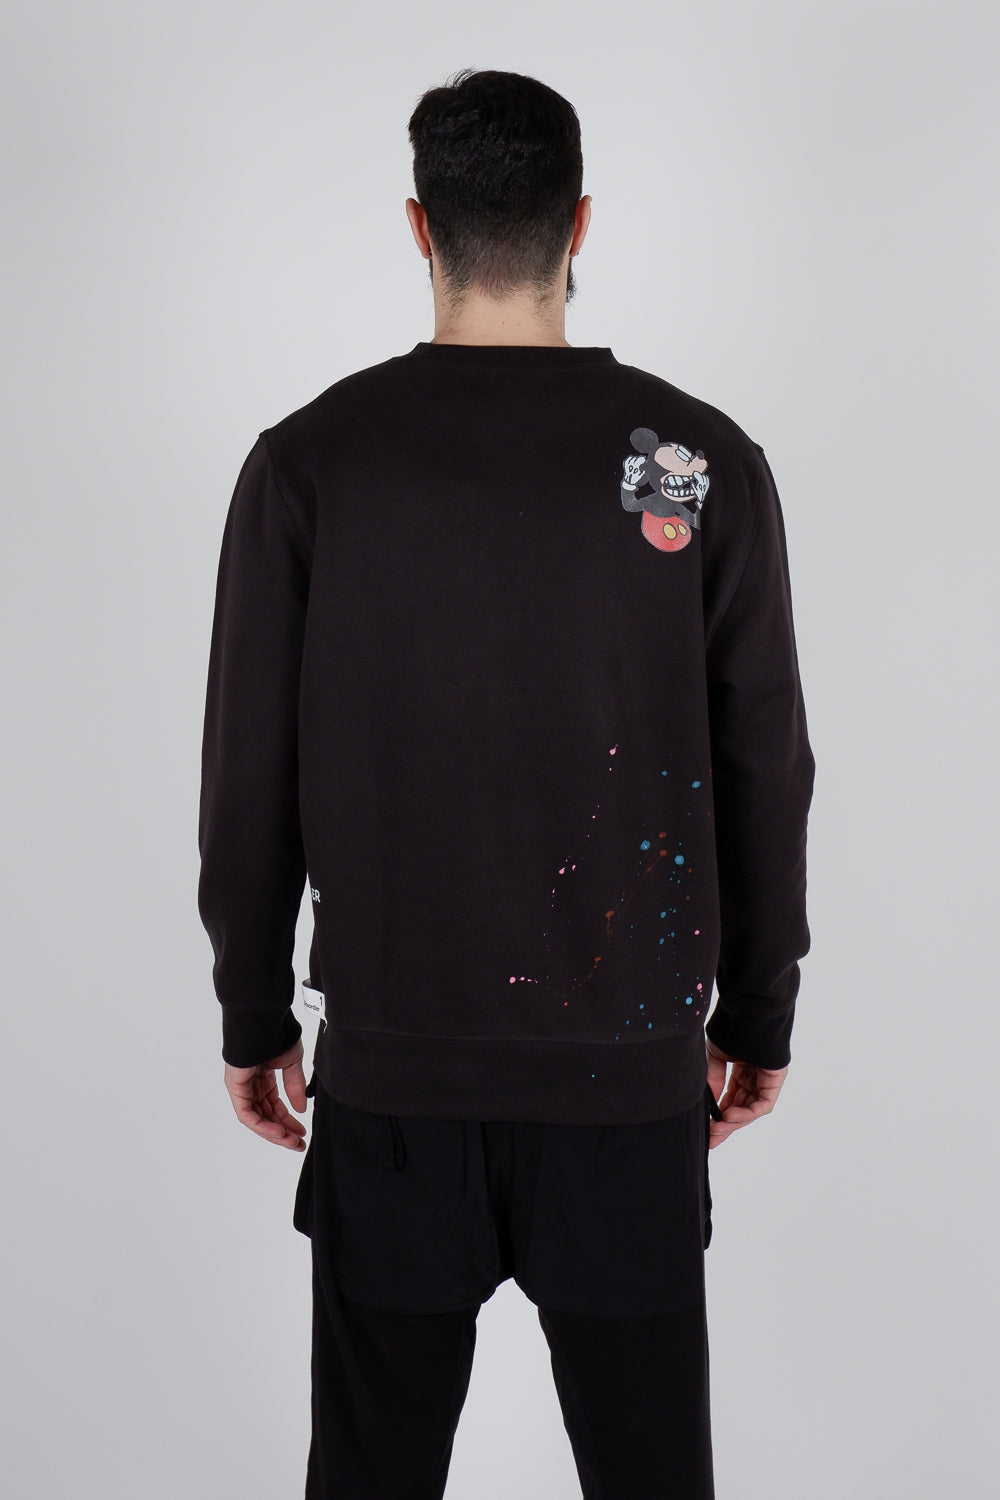 Buy the ABE Disney Disorder Sweater Black at Intro. Spend £50 for free UK delivery. Official stockists. We ship worldwide.